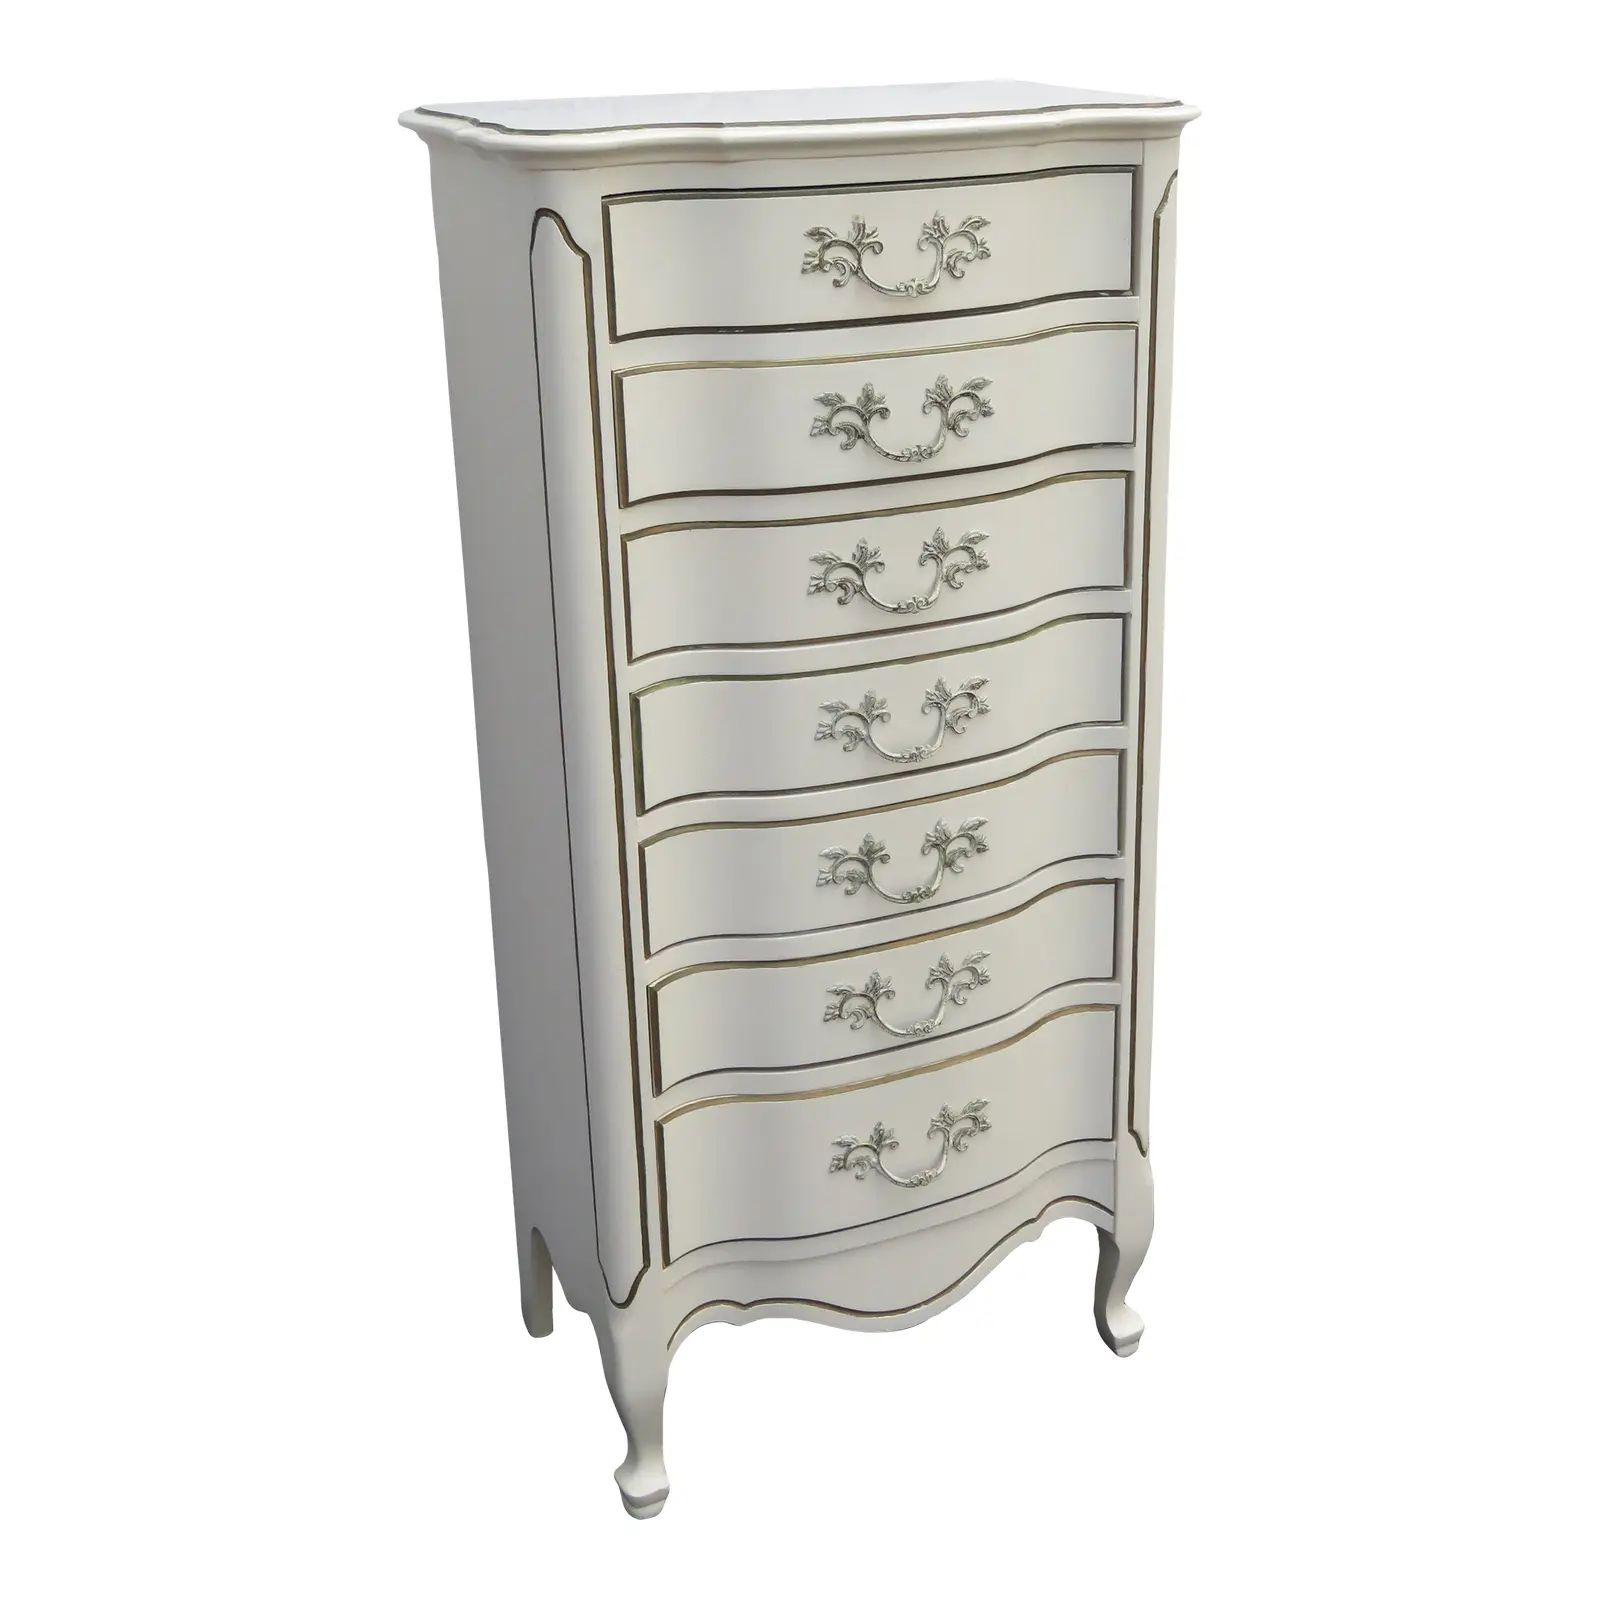 French Shabby Chic Painted Tall Narrow Lingerie Jewelry Chest | Chairish